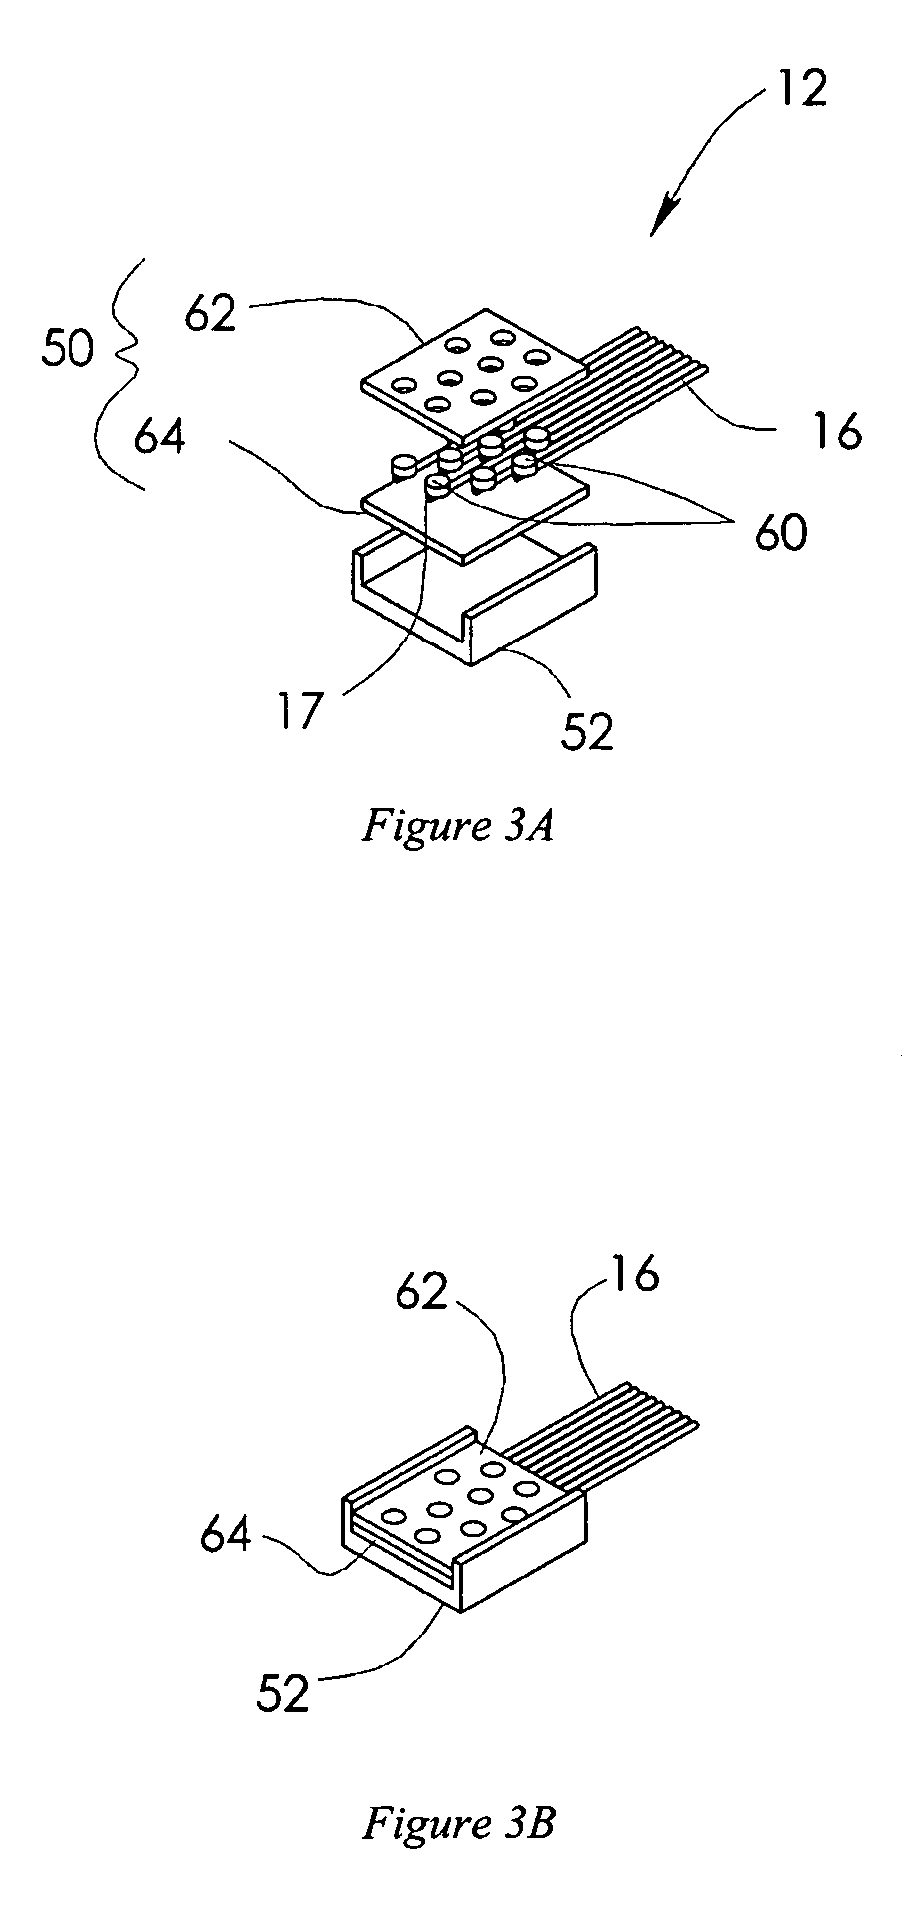 Implantable modular, multi-channel connector system for nerve signal sensing and electrical stimulation applications